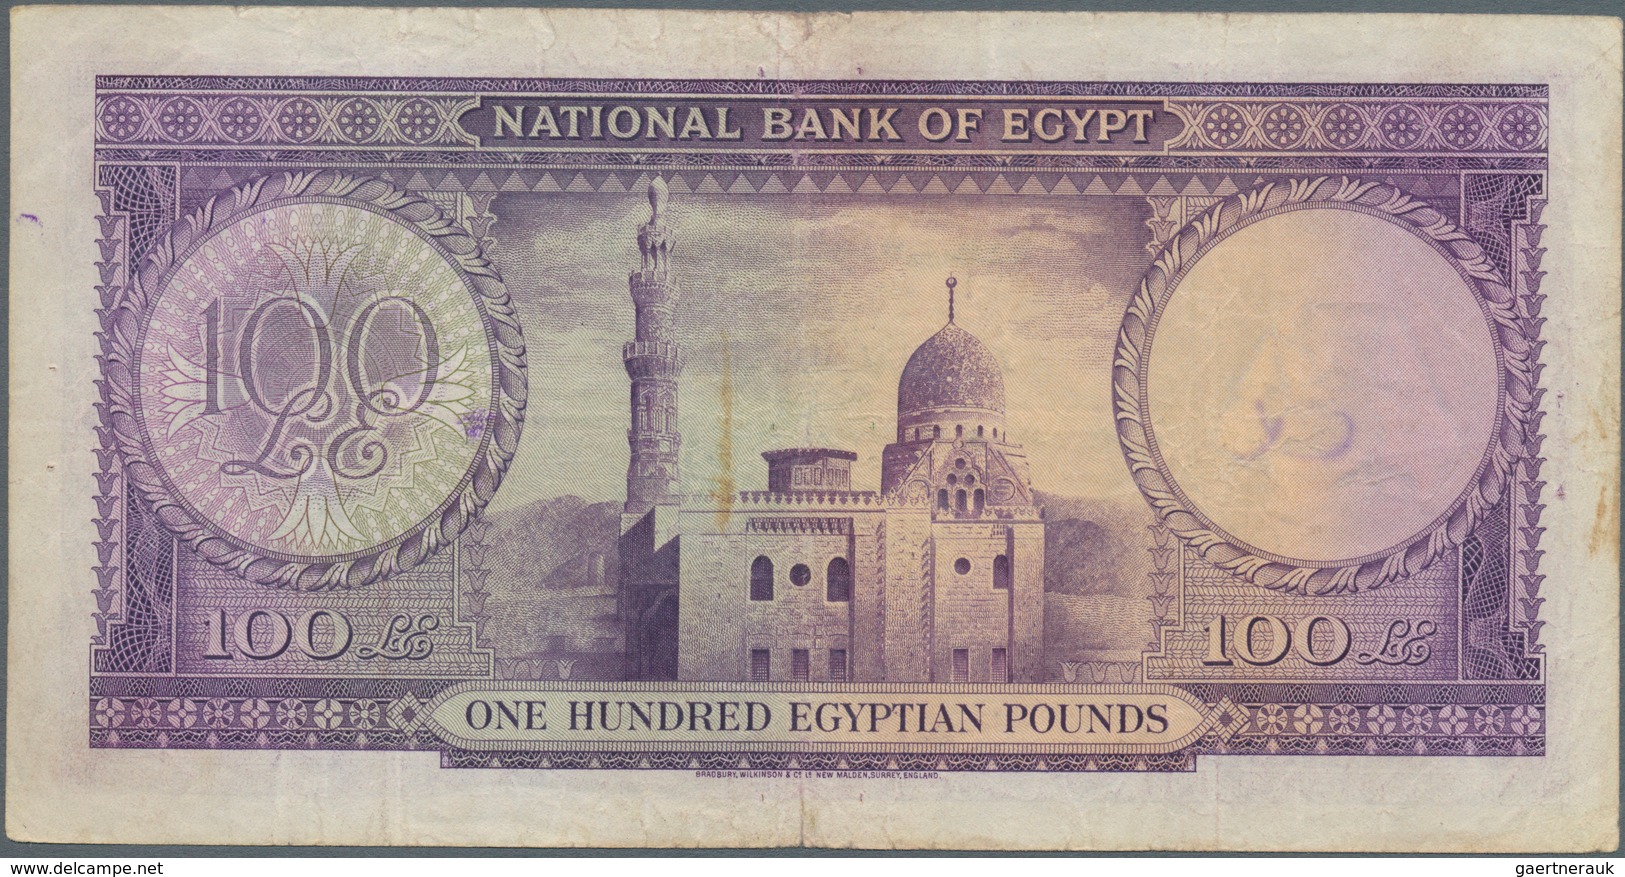 01396 Egypt / Ägypten: 100 Pounds 1951 P. 27b, Used With Folds And Creases, A Small Pen Writing At Left, P - Egypte